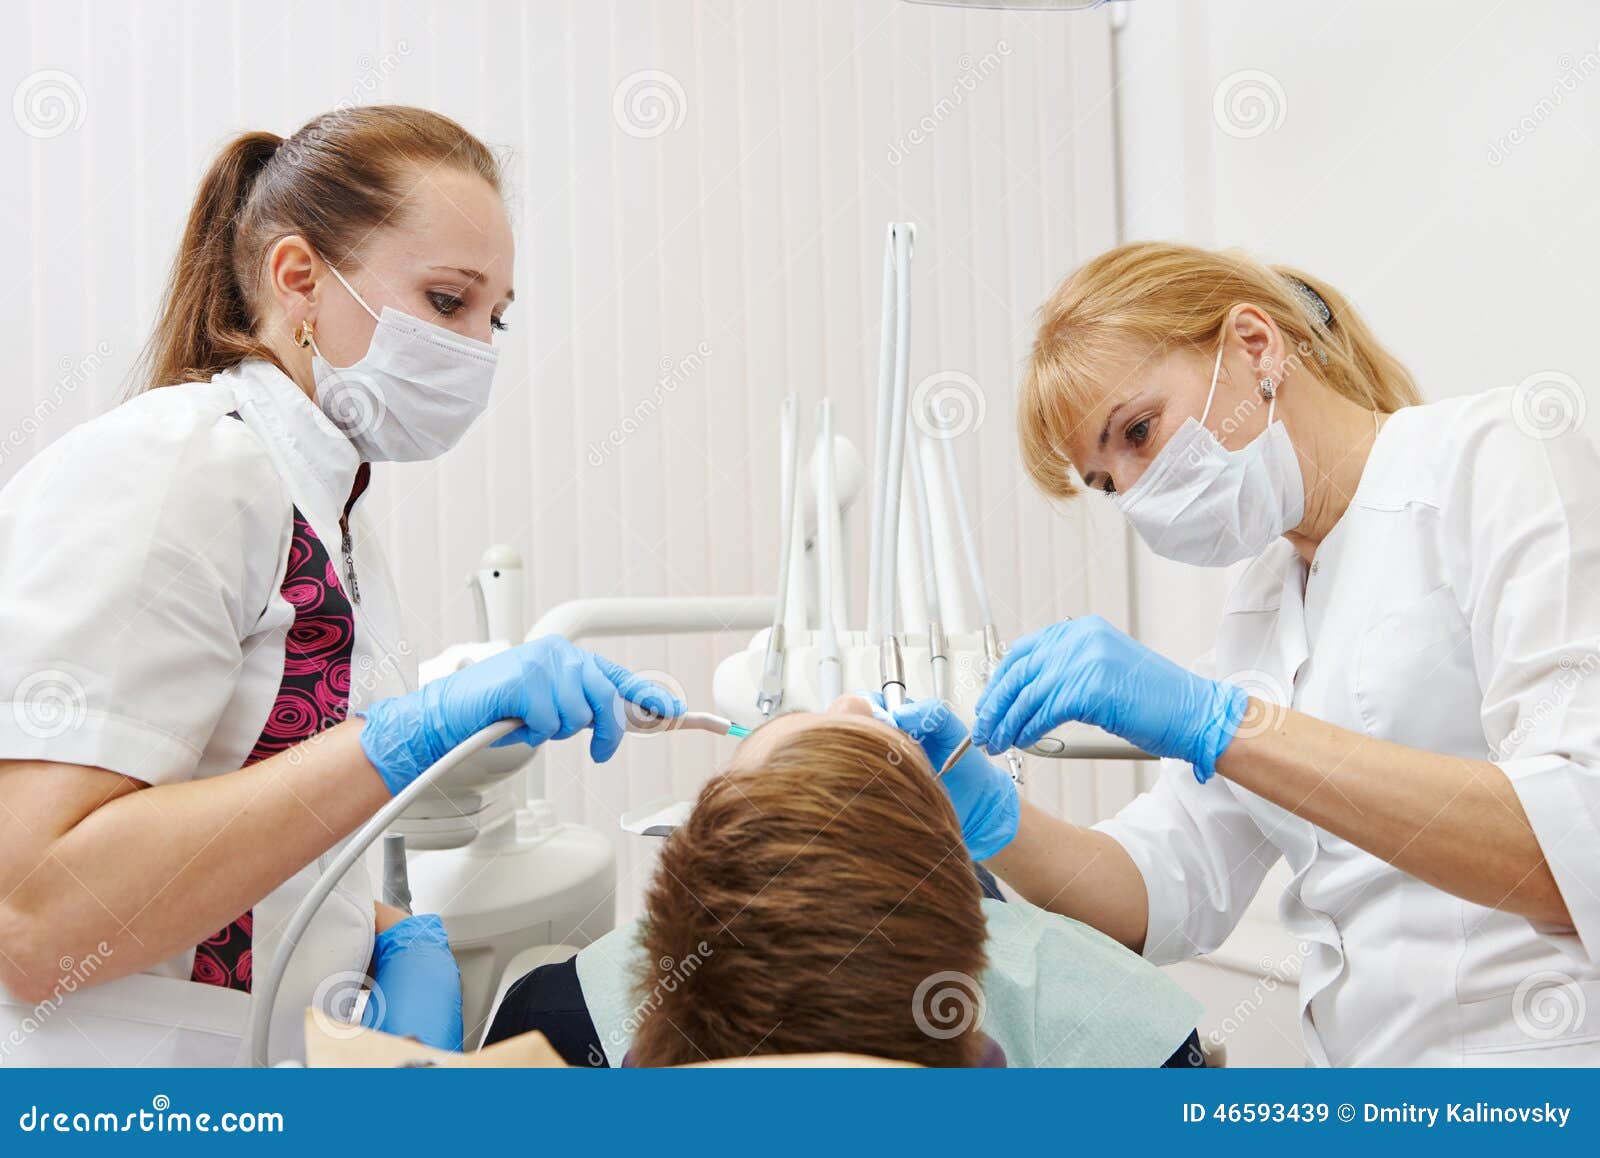 dental-care-clinic-dentist-orthodontist-female-doctor-making-to-patient-working-place-46593439.jpg